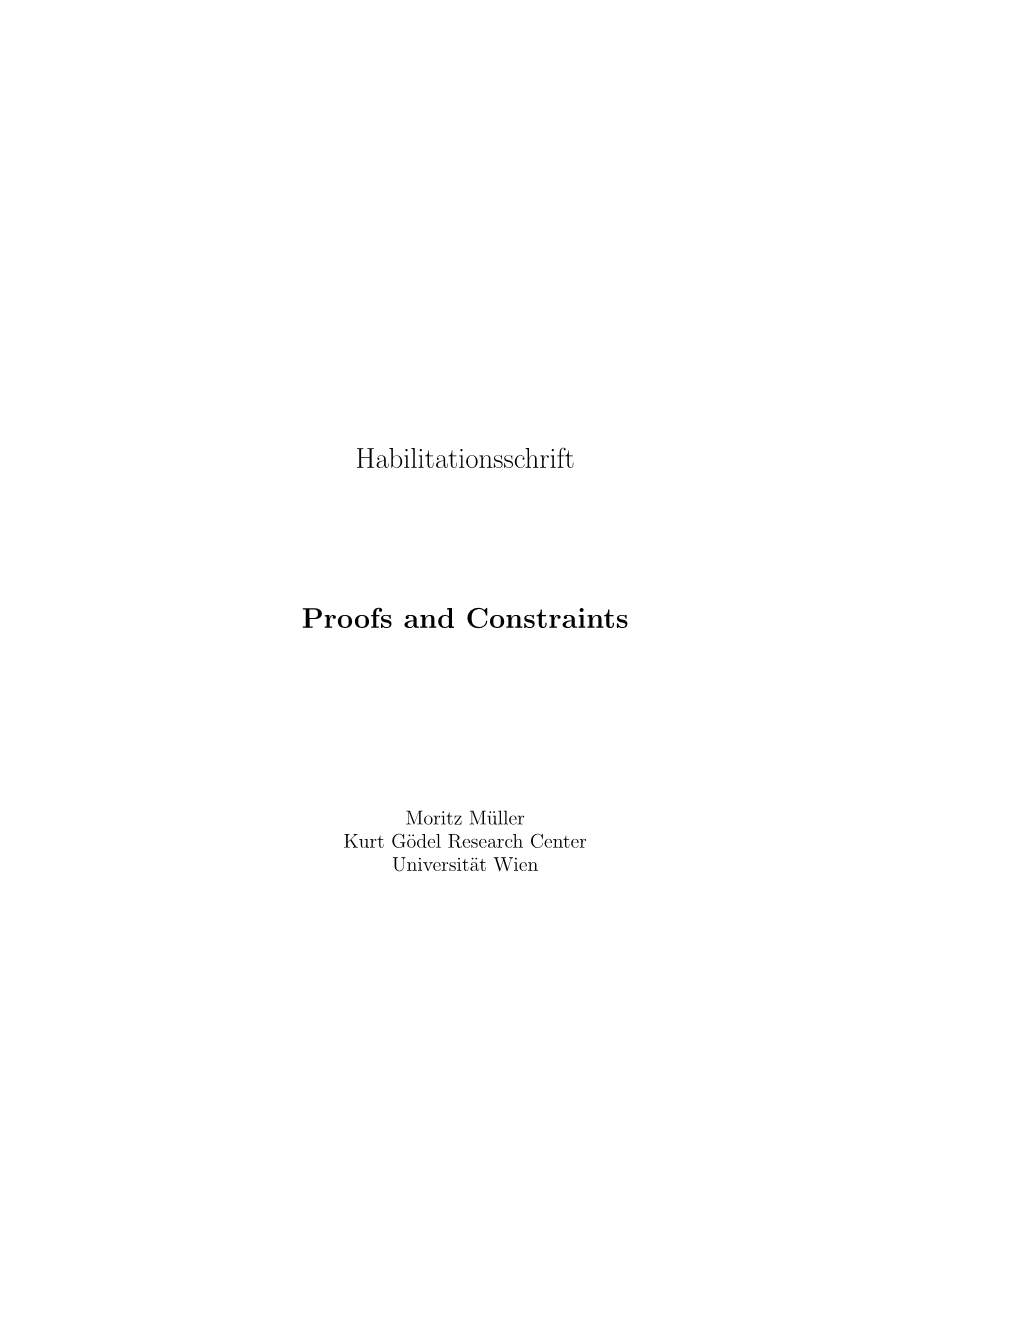 Proofs and Constraints